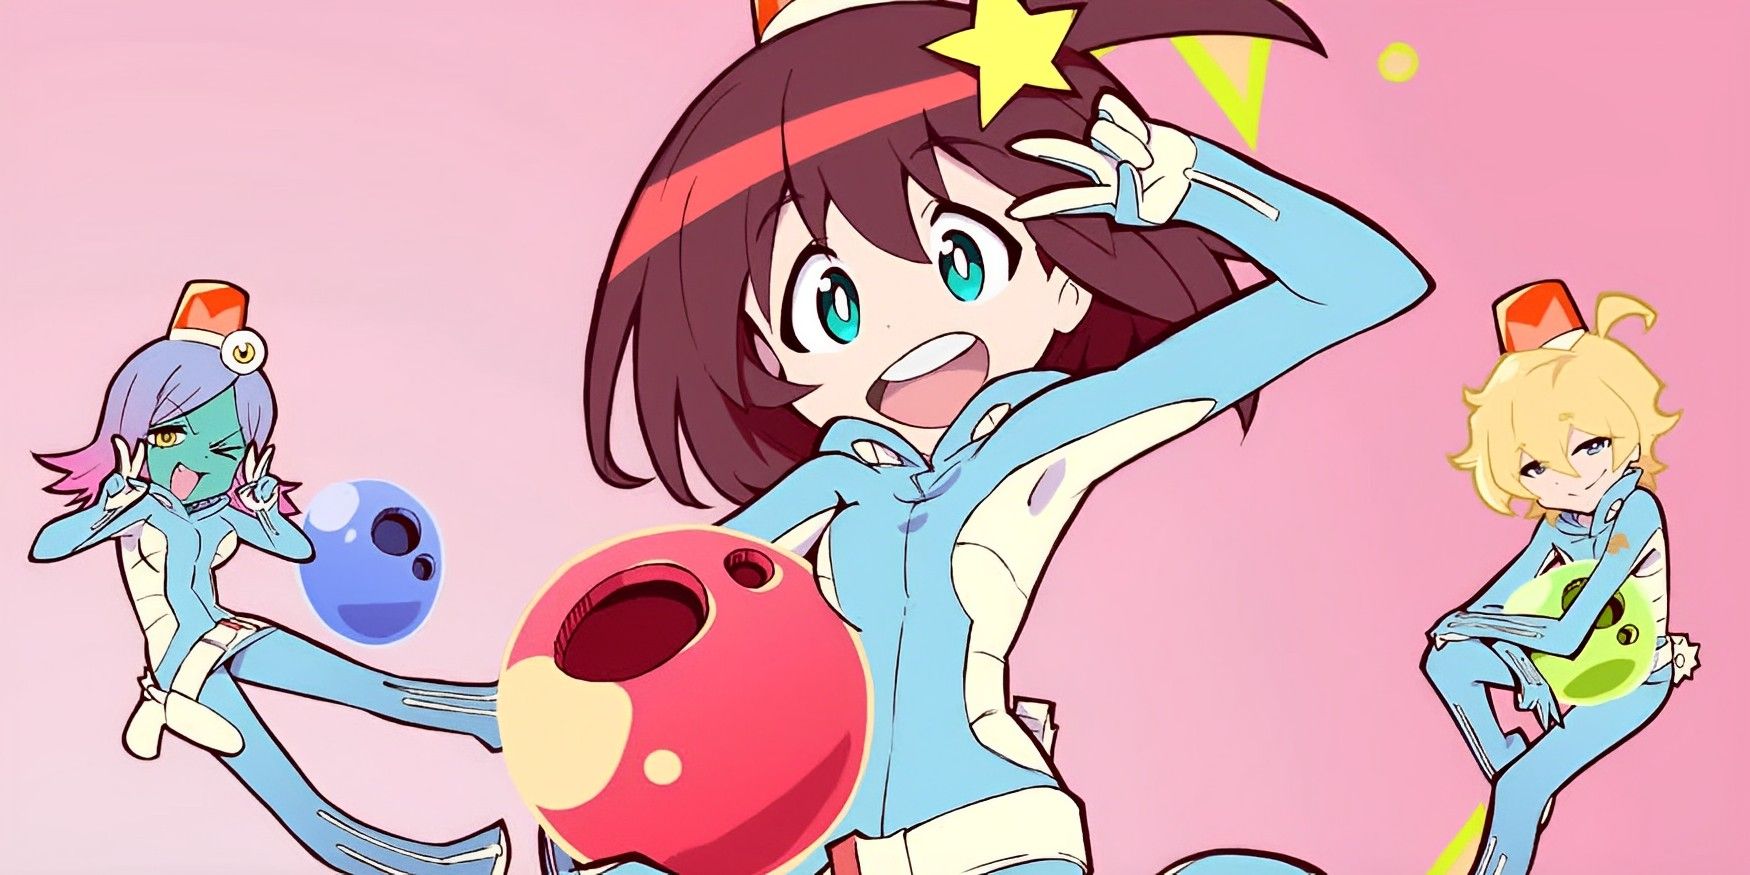 Luluco and friends in uniform